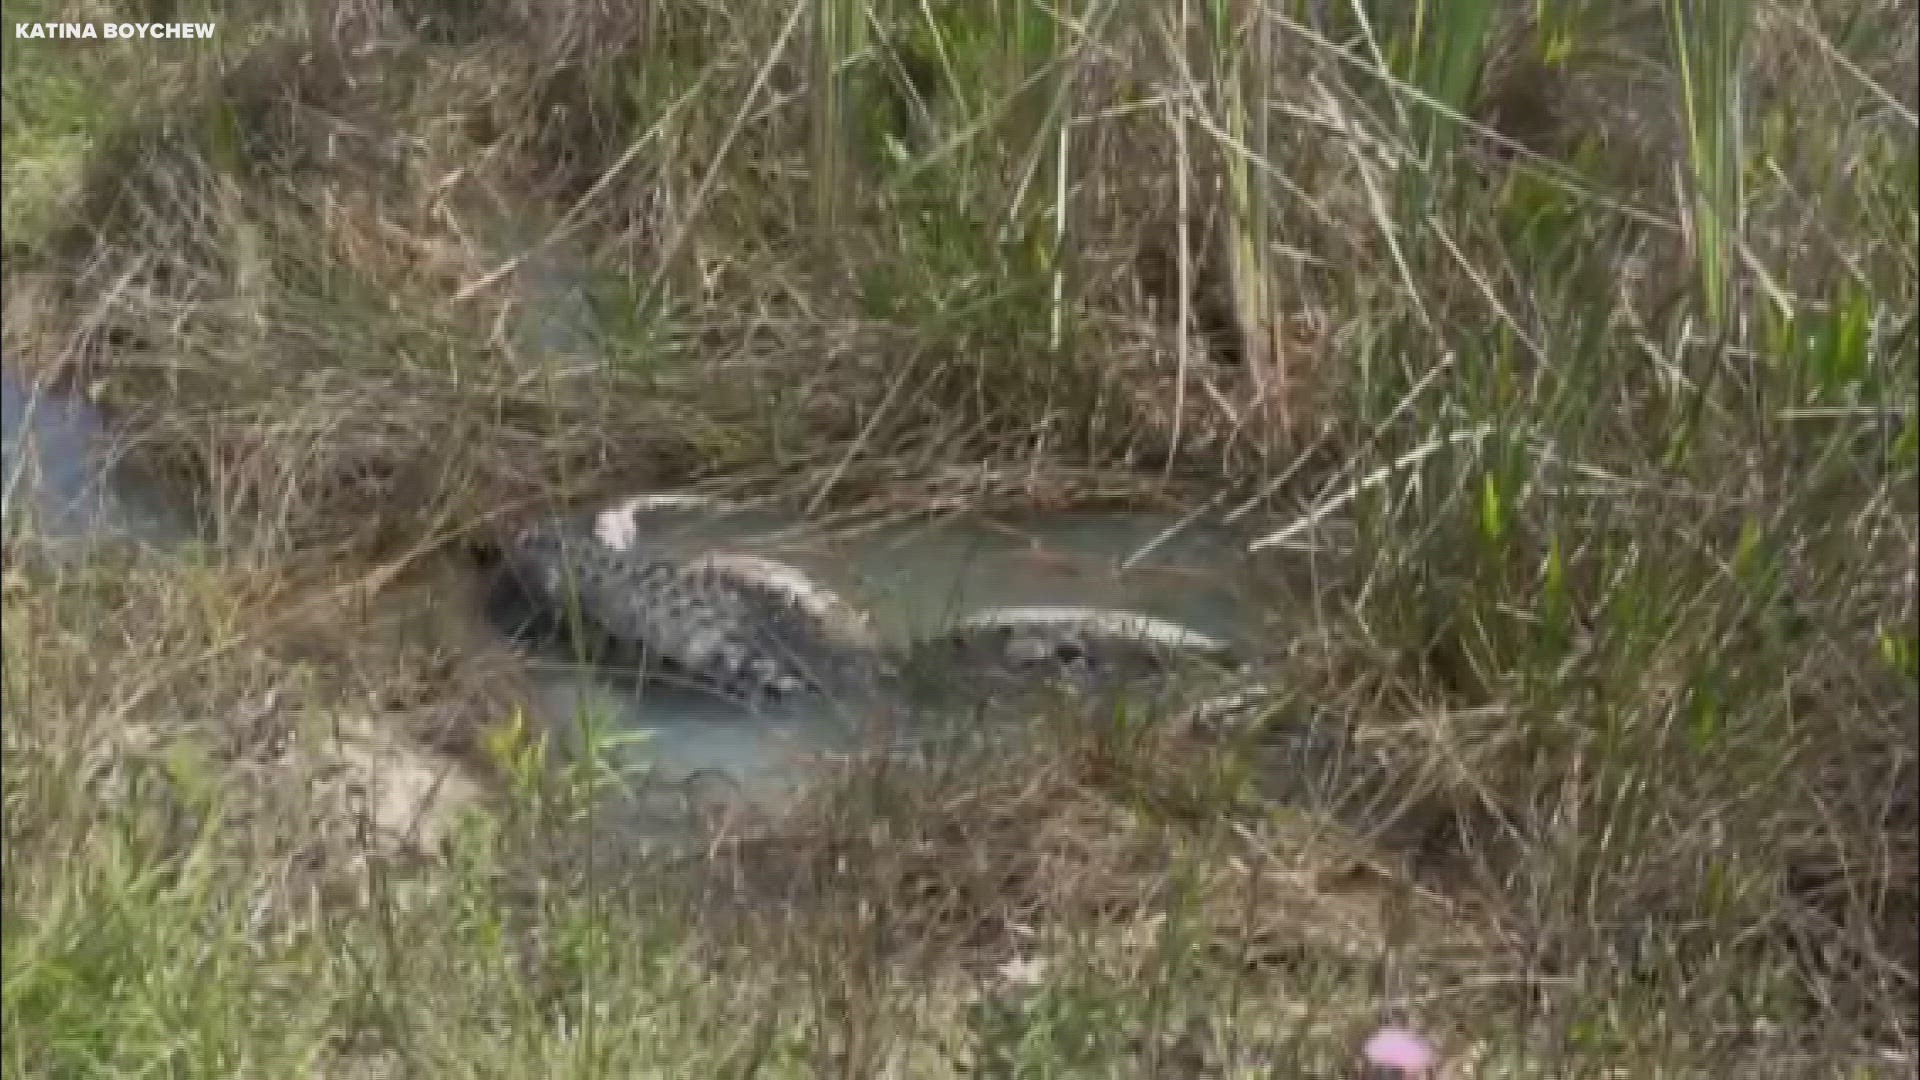 The gator munches on the snake's head a couple more times before the video cuts out.